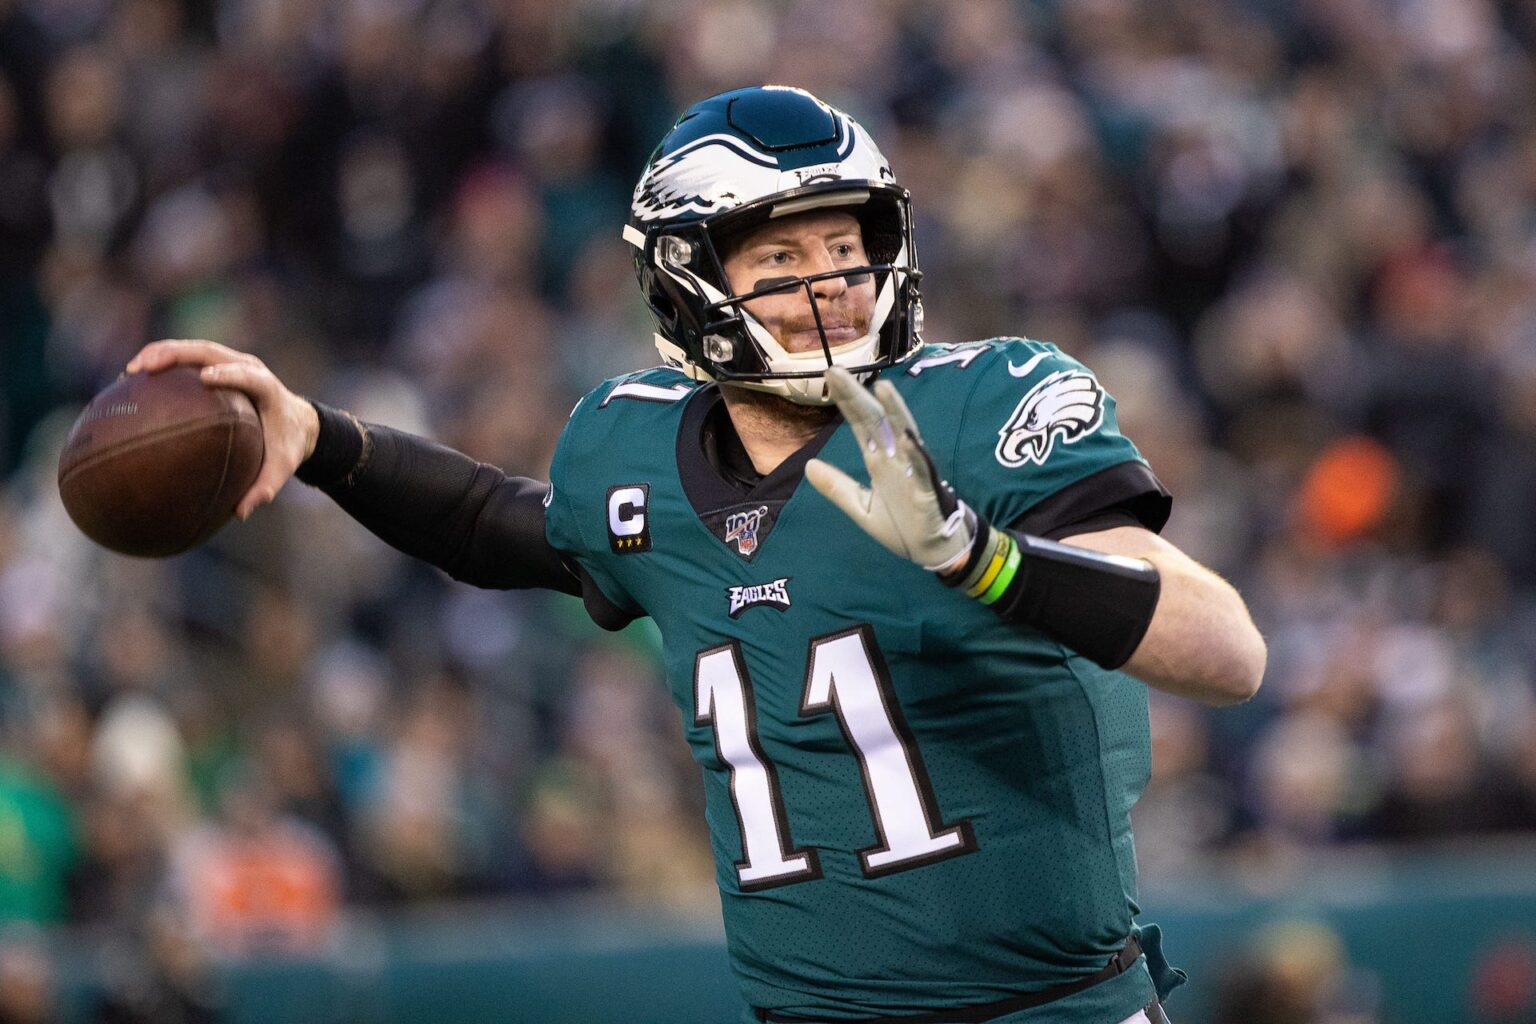 The Philadelphia Eagles traded their quarterback to the Indianapolis Colts. Will the new team improve Carson Wentz's stats? Find out right here.